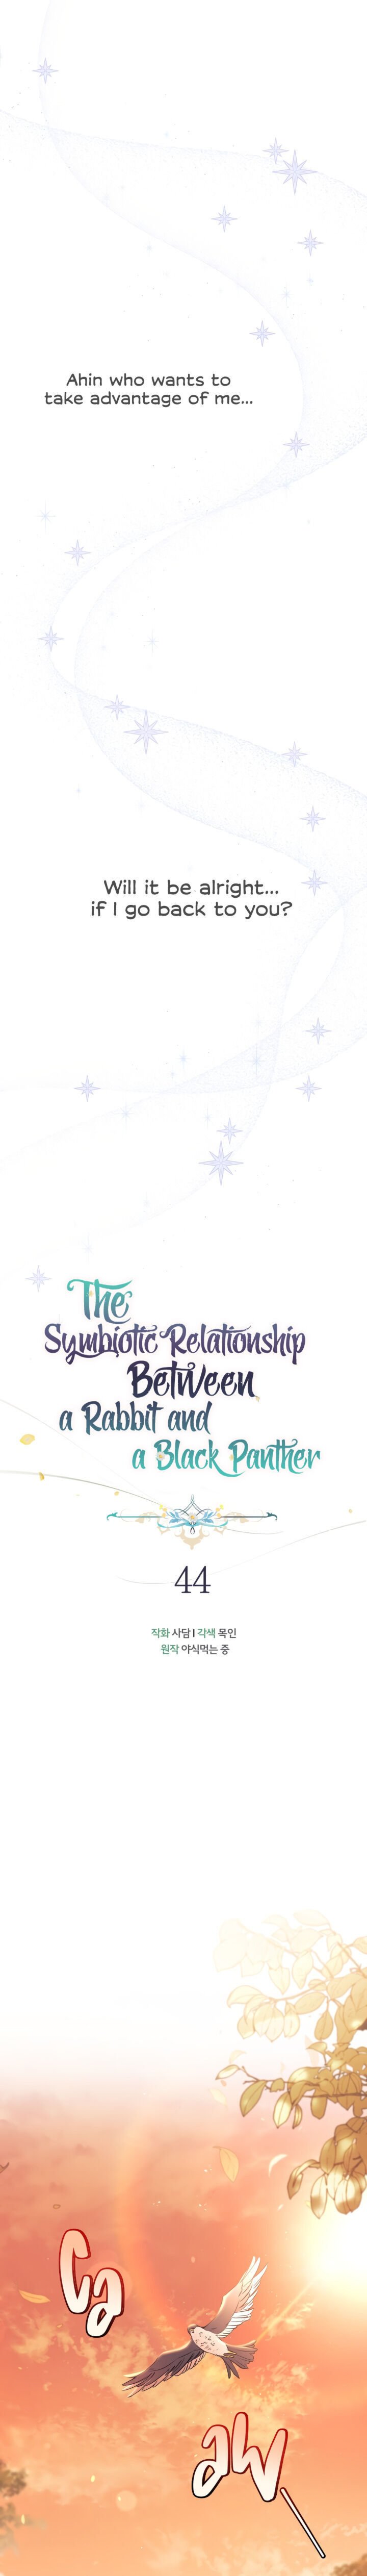 the-symbiotic-relationship-between-a-rabbit-and-a-black-panther-chap-44-6